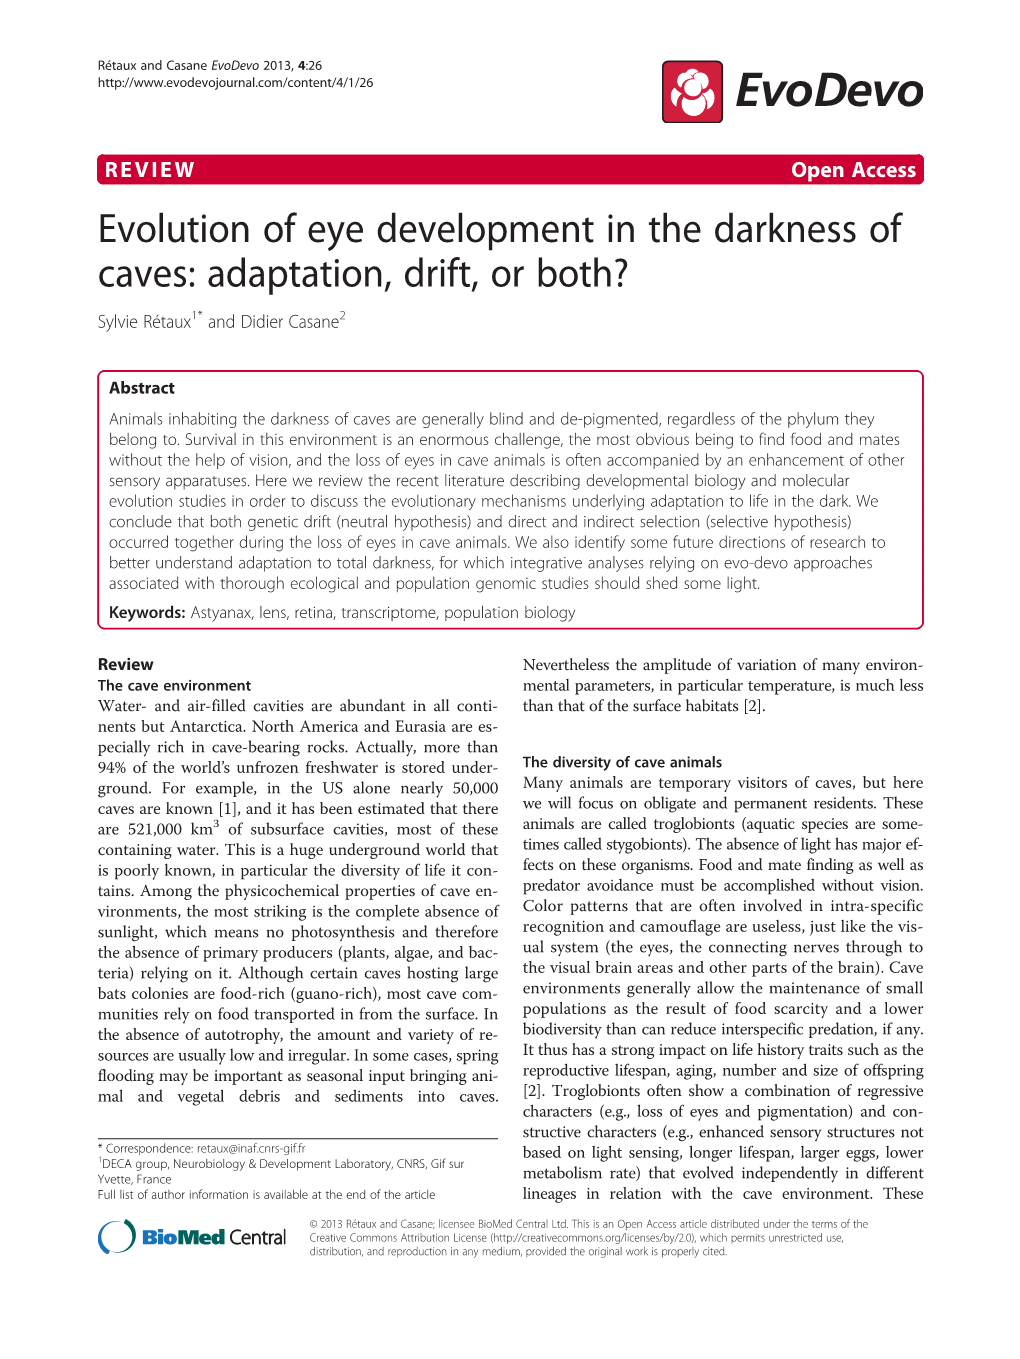 Evolution of Eye Development in the Darkness of Caves: Adaptation, Drift, Or Both? Sylvie Rétaux1* and Didier Casane2